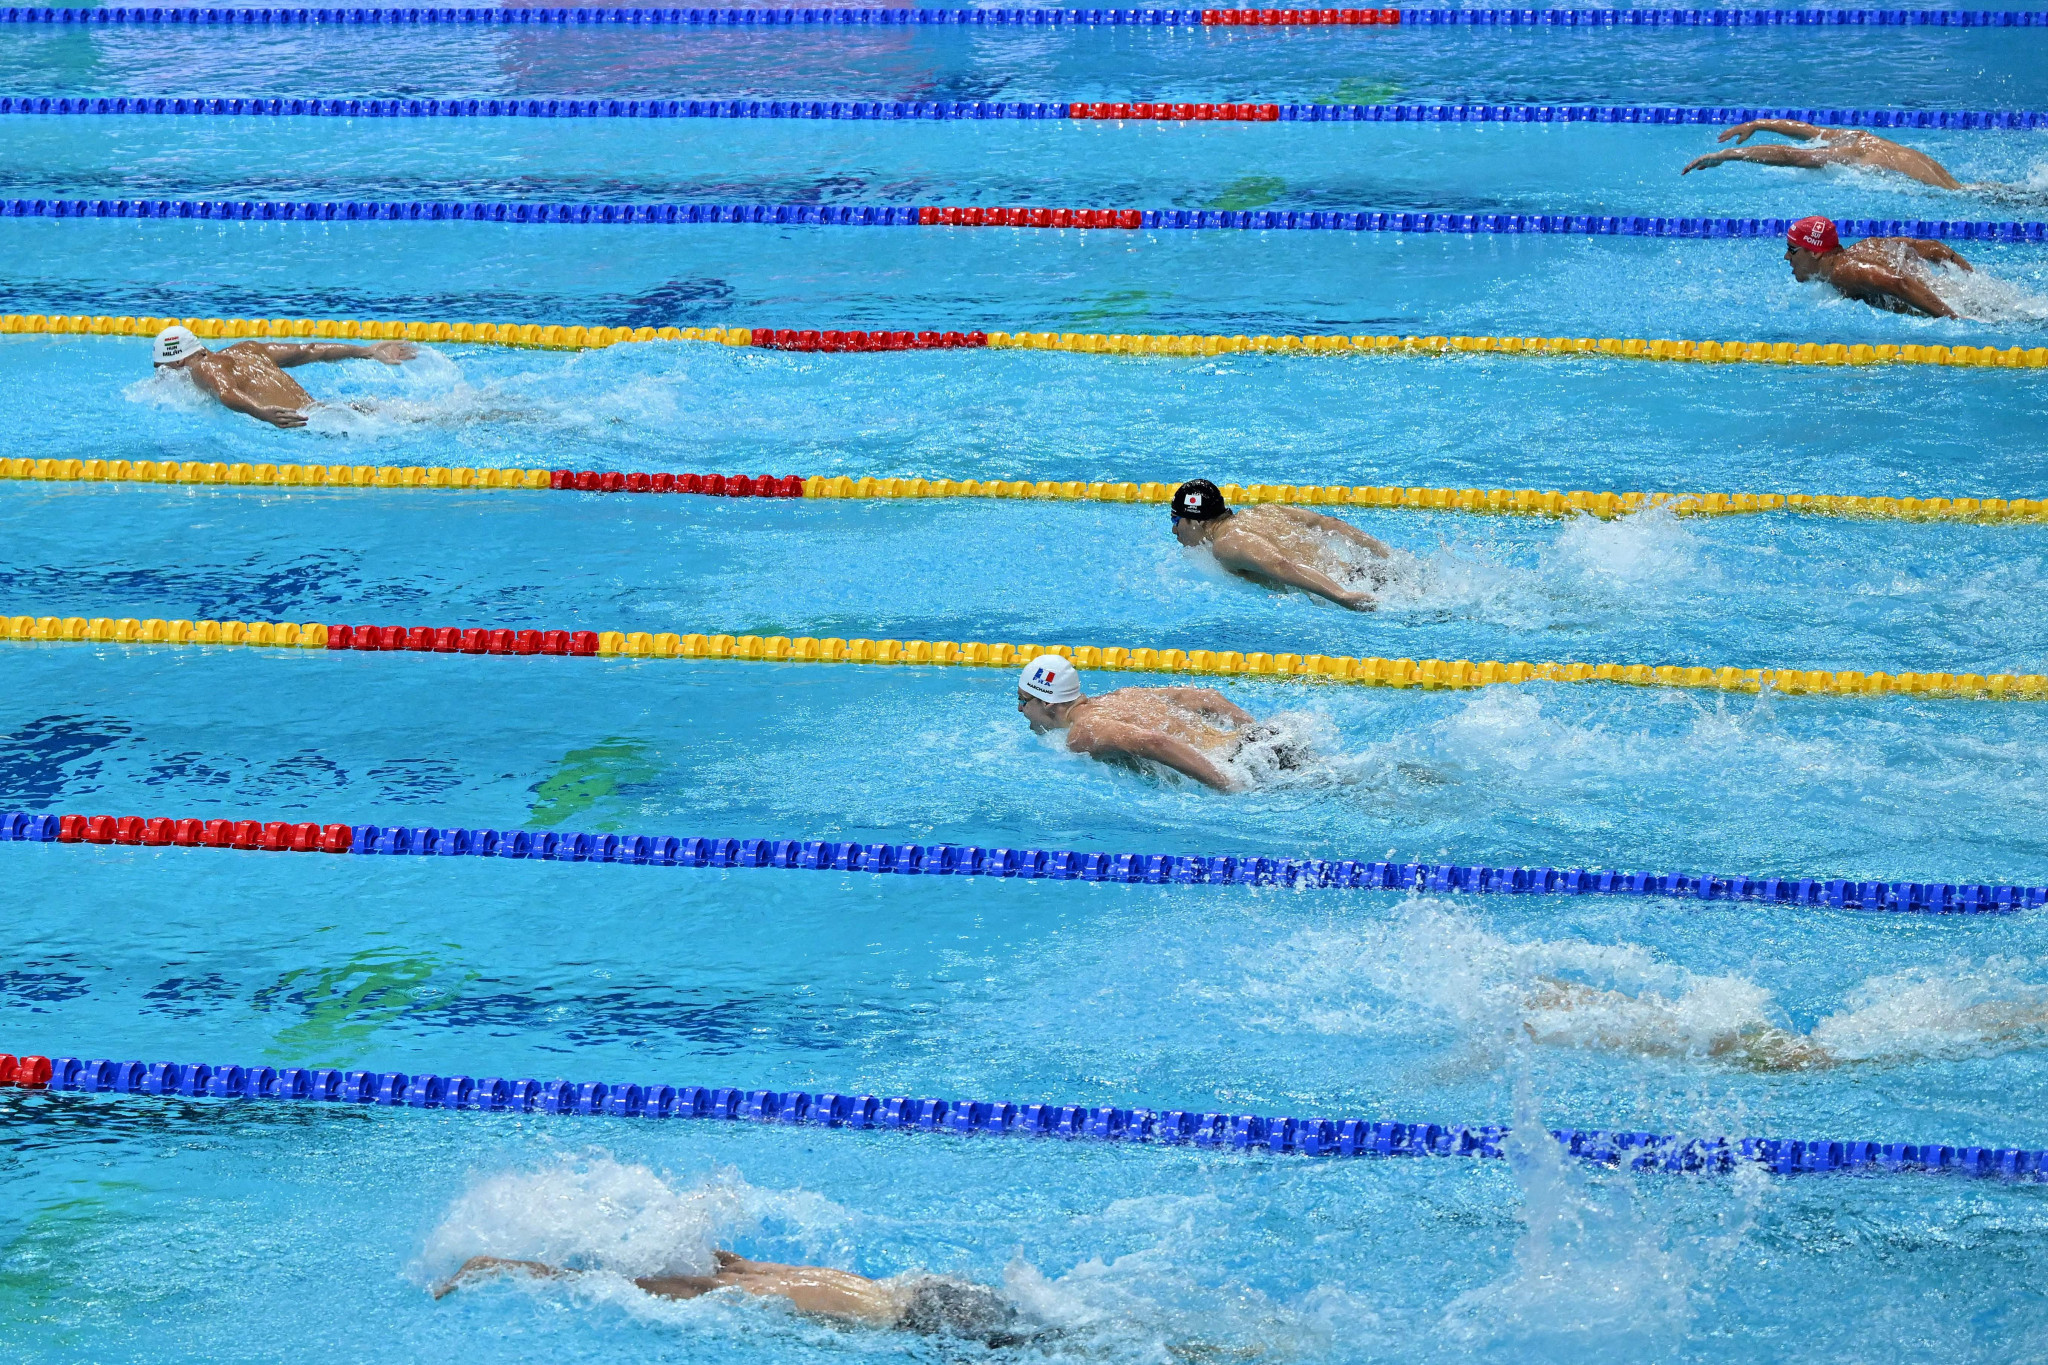 Hungary's Kristóf Milák, furthest left, won the men's 200m butterfly final by more than three seconds ©Getty Images